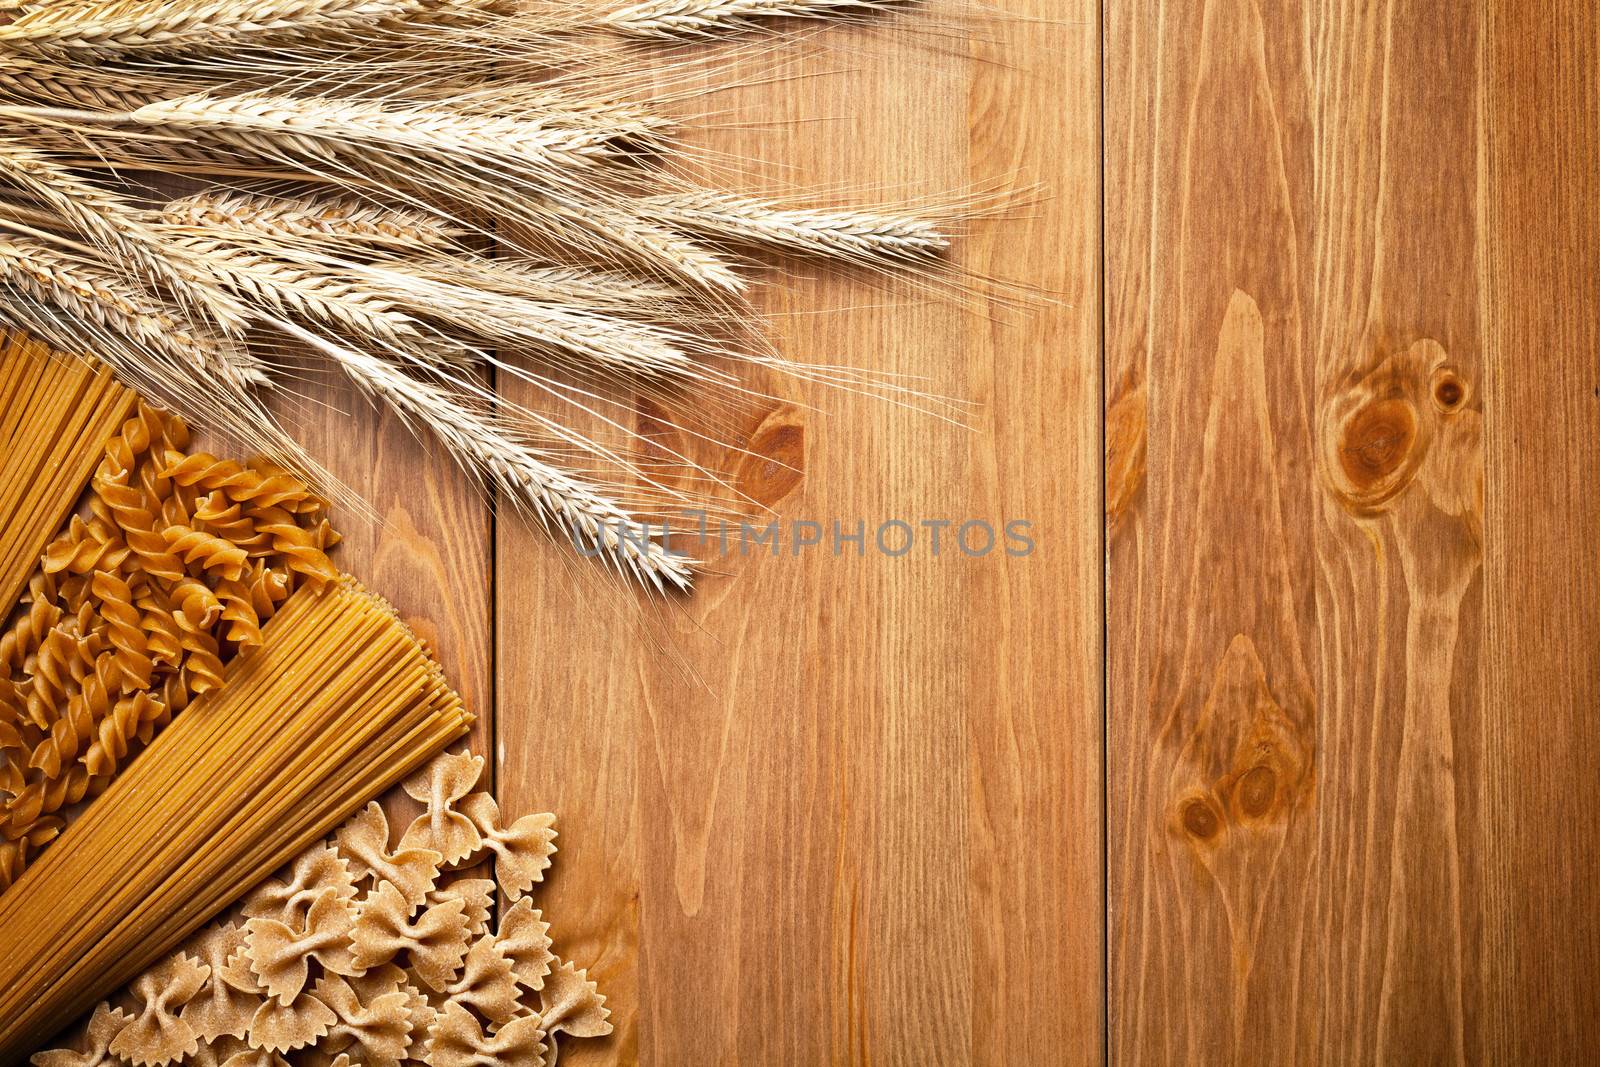 Pasta with wheat ear on wooden background. Different types of whole wheat pasta. Top view. Copy space